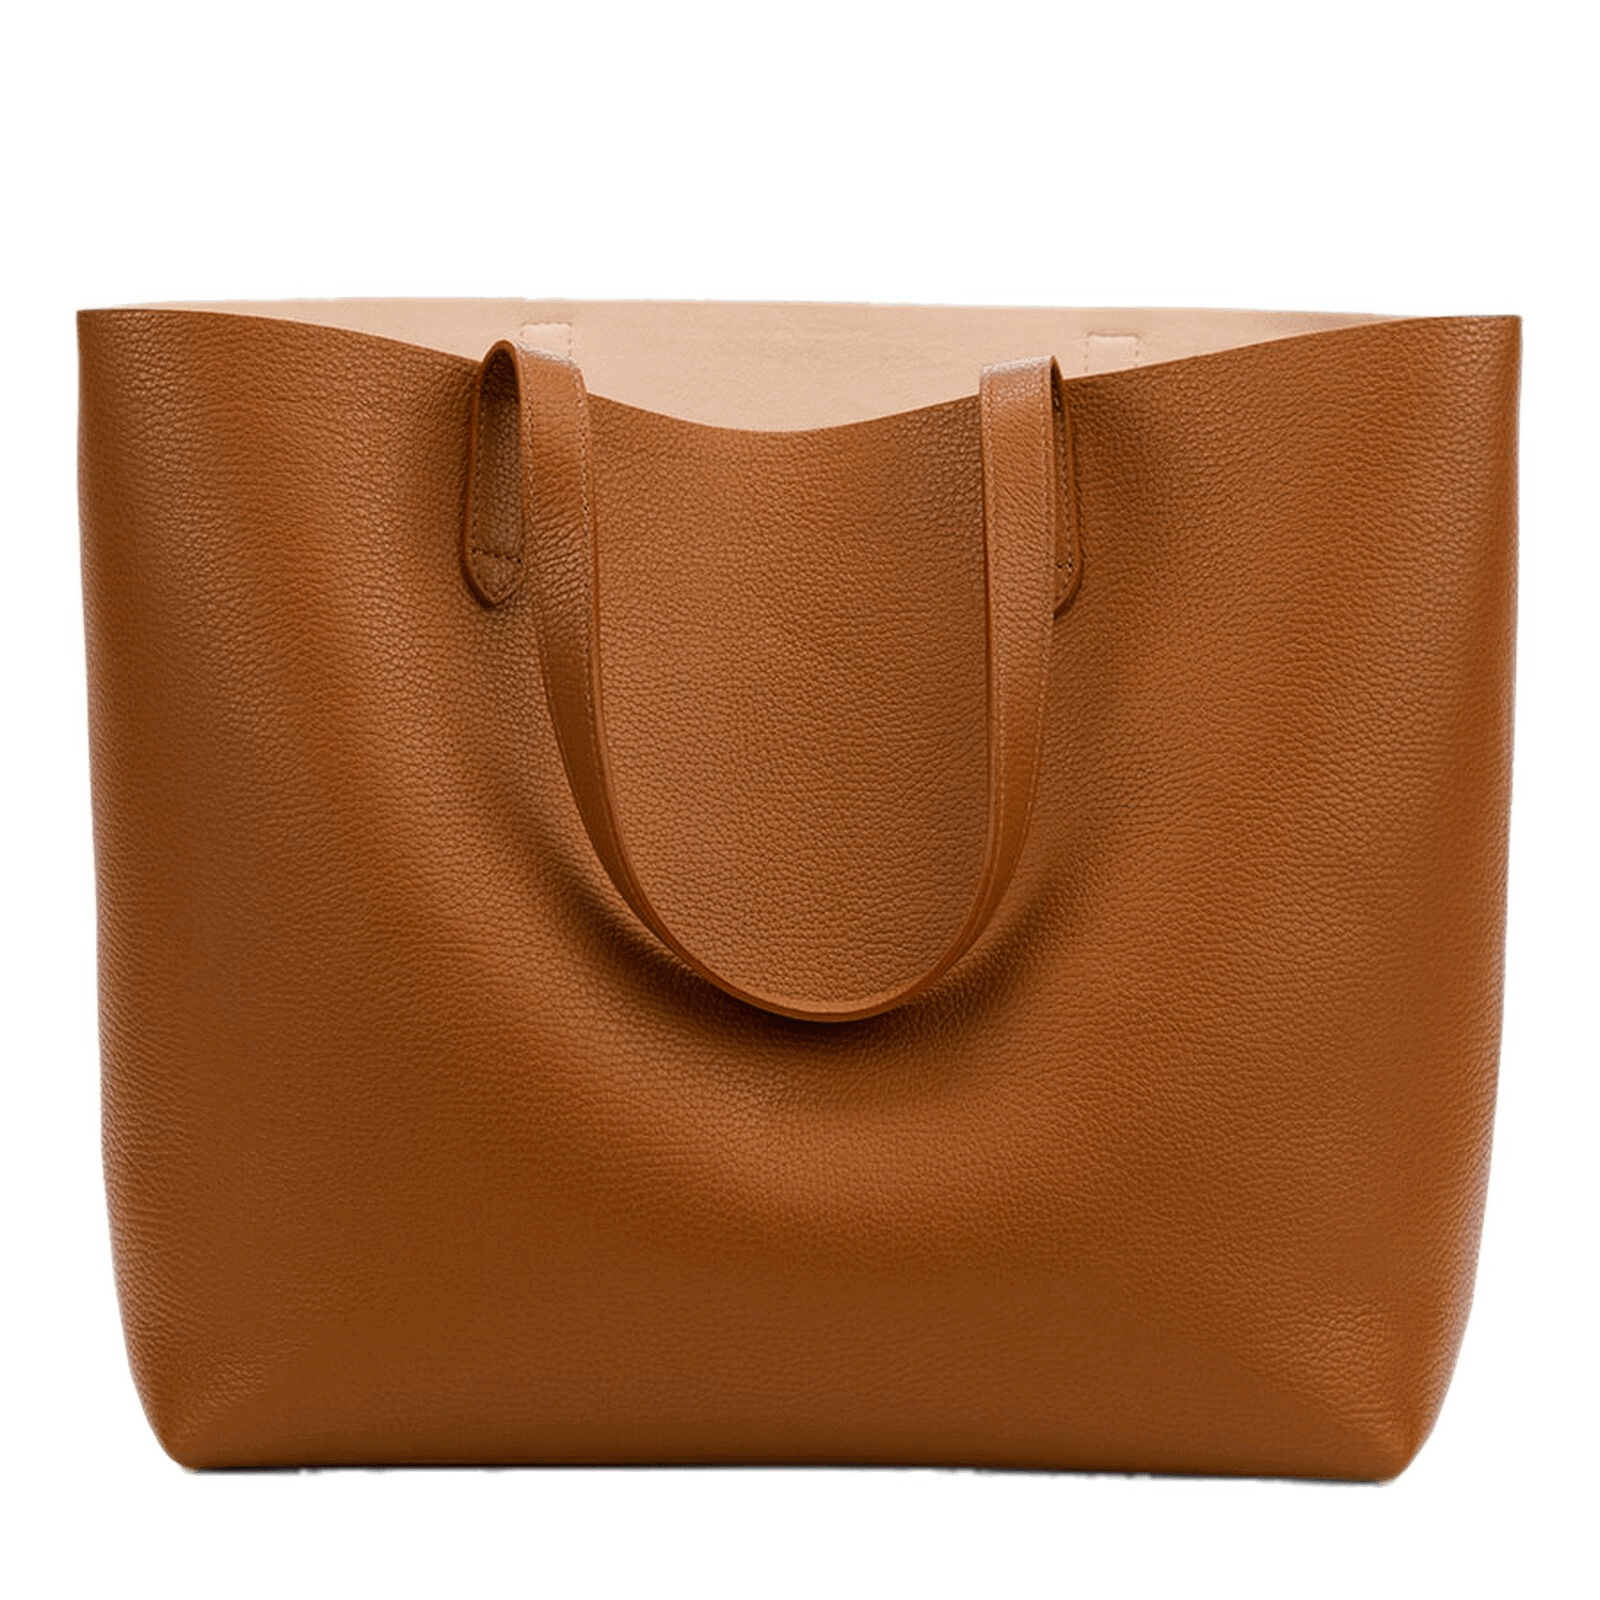 cuyana structured tote